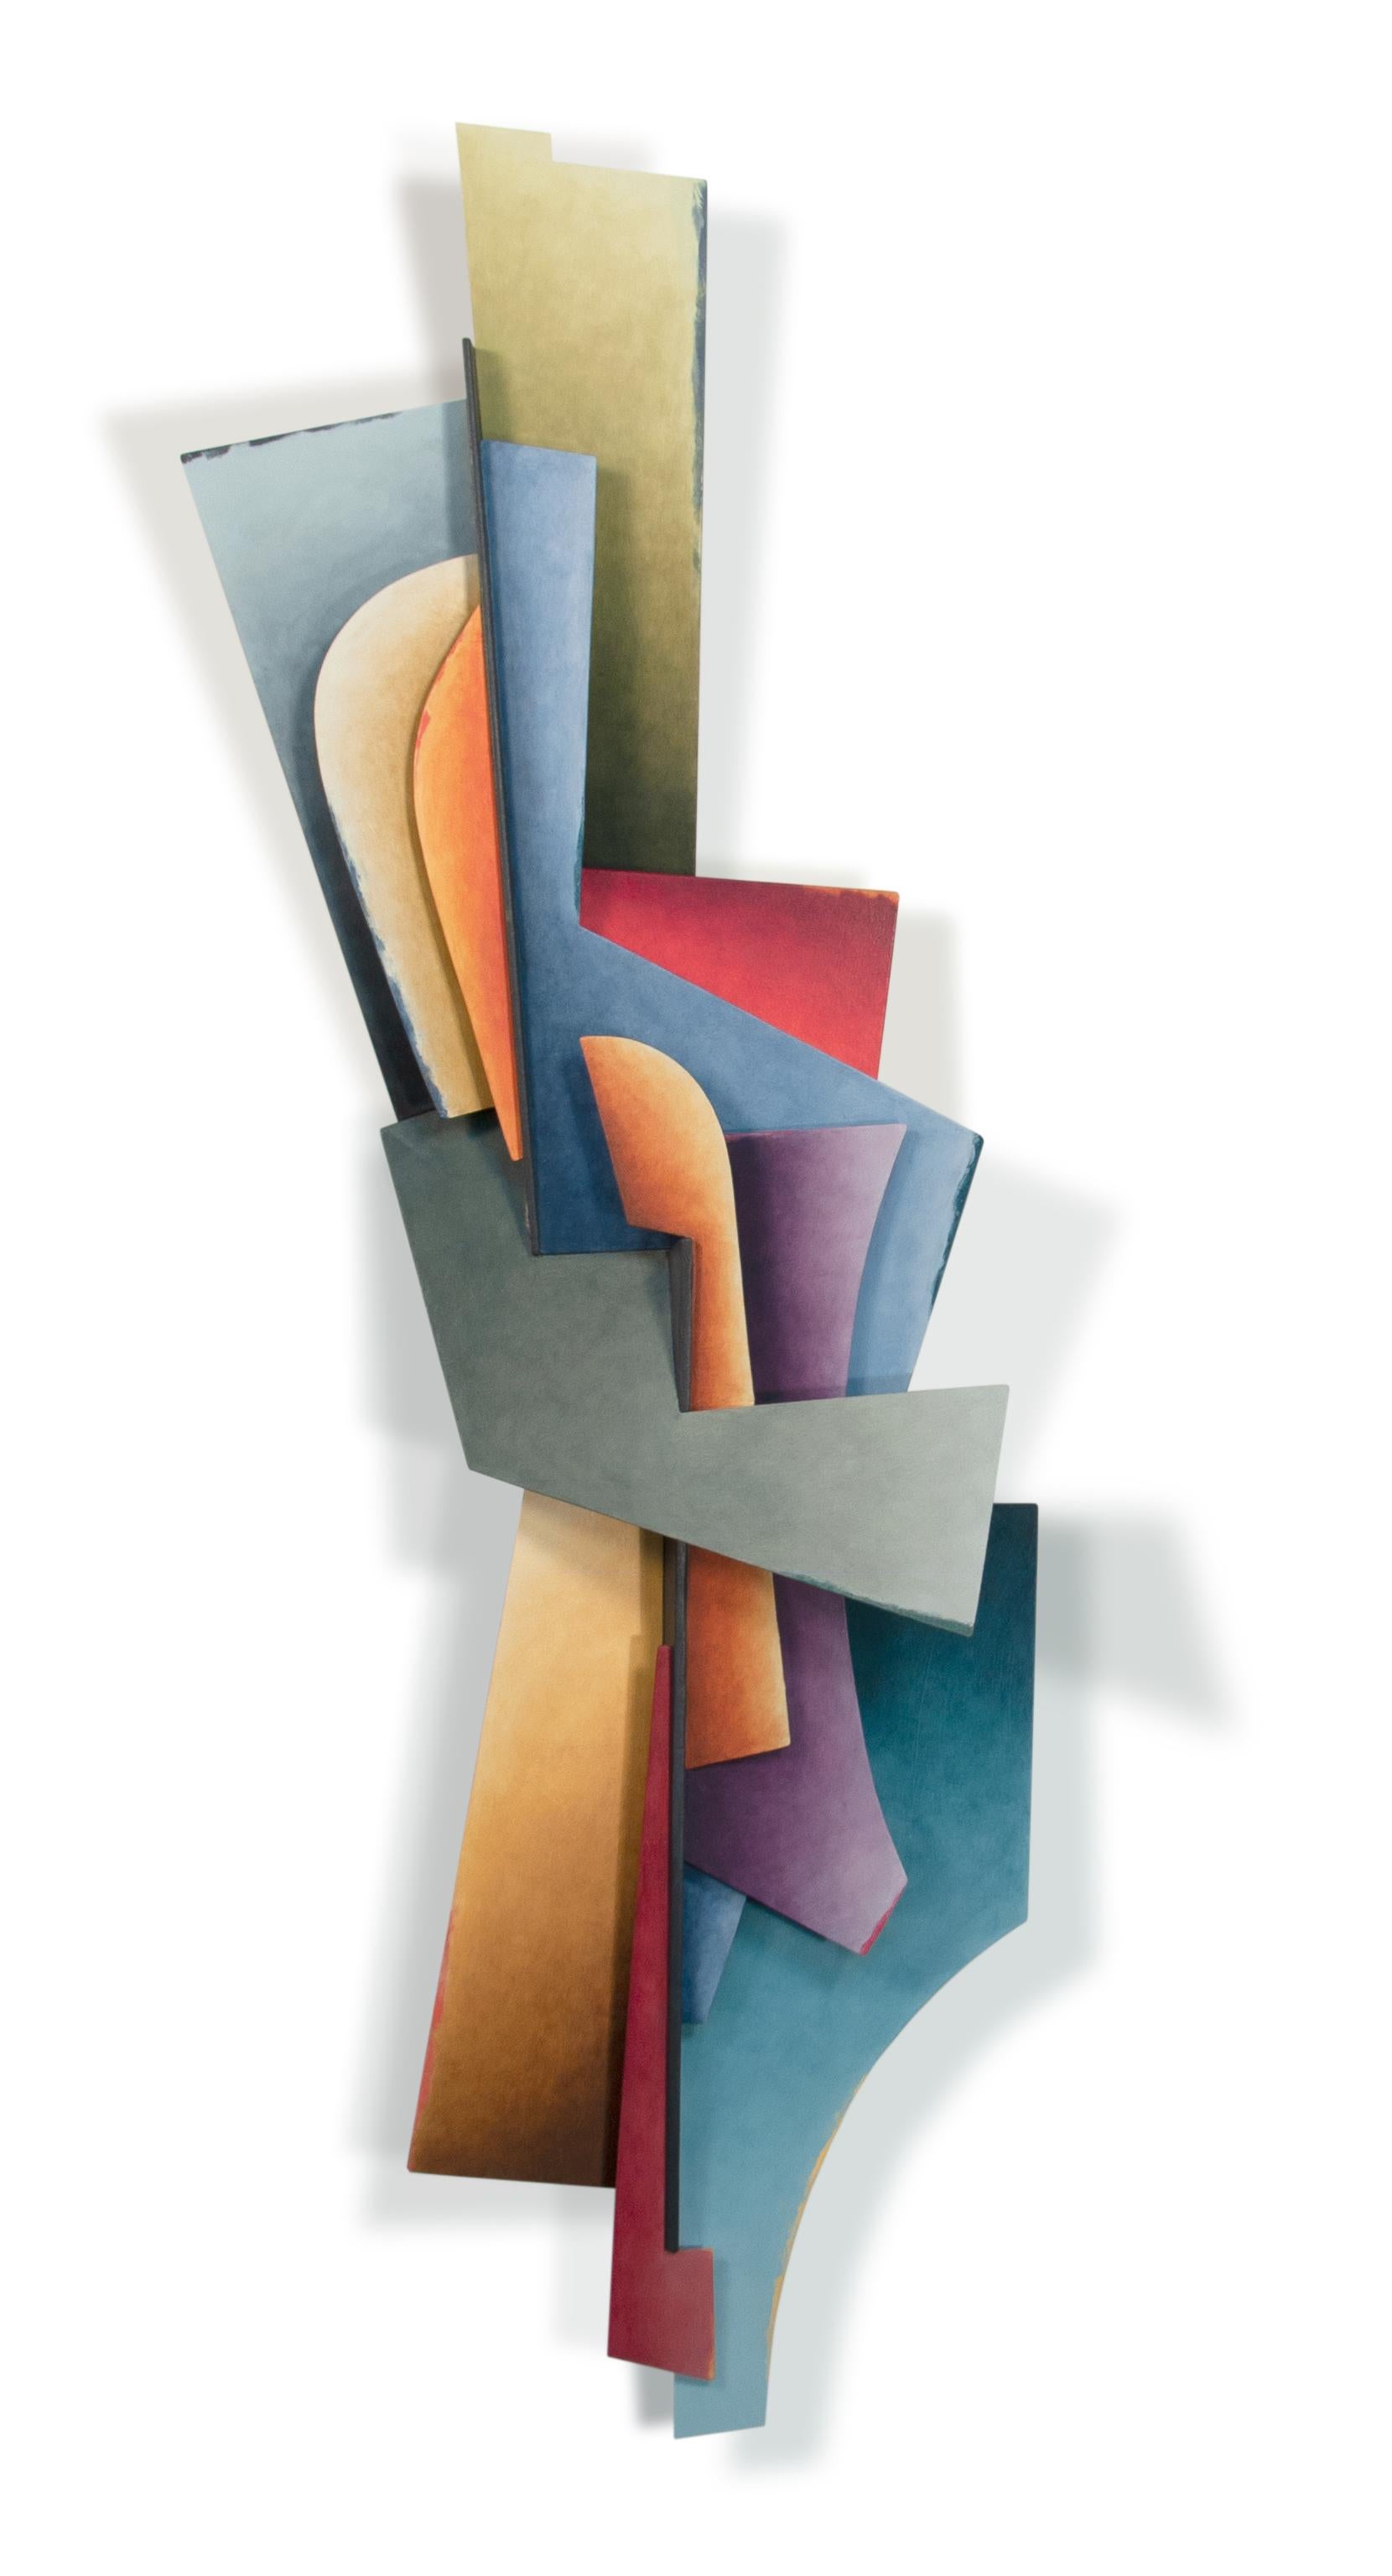 The Journey - Abstract Geometric Form, Hand Painted Welded Steel Wall Sculpture  - Mixed Media Art by Chris Hill